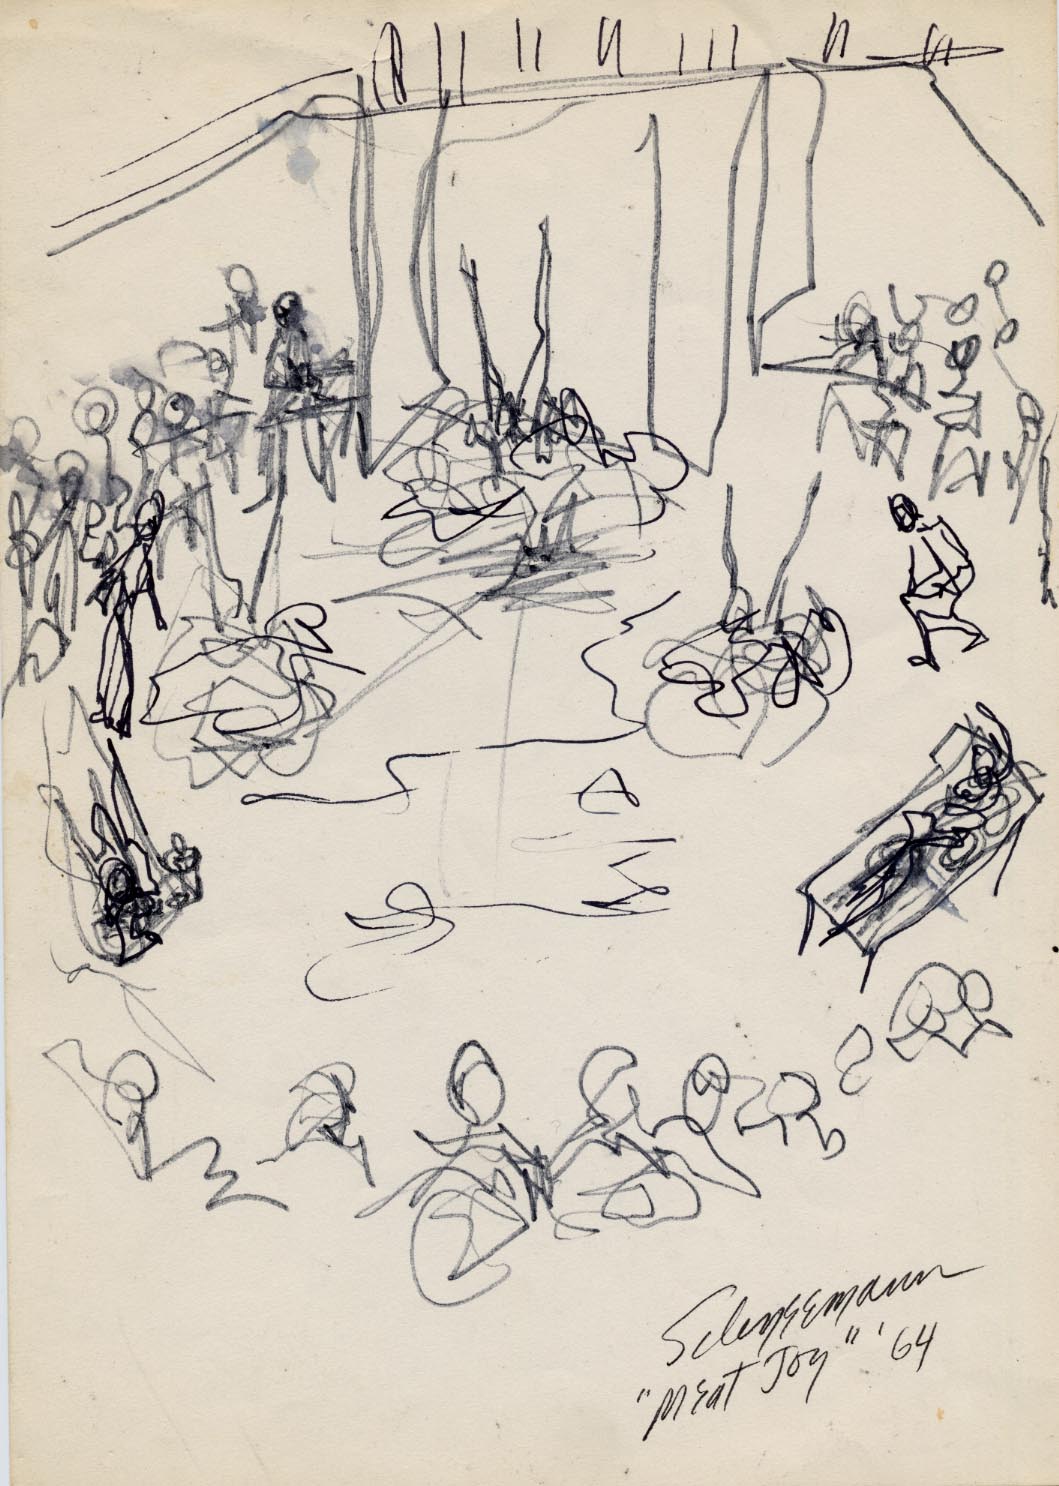 Concept sketch of the performance in charcoal on paper.